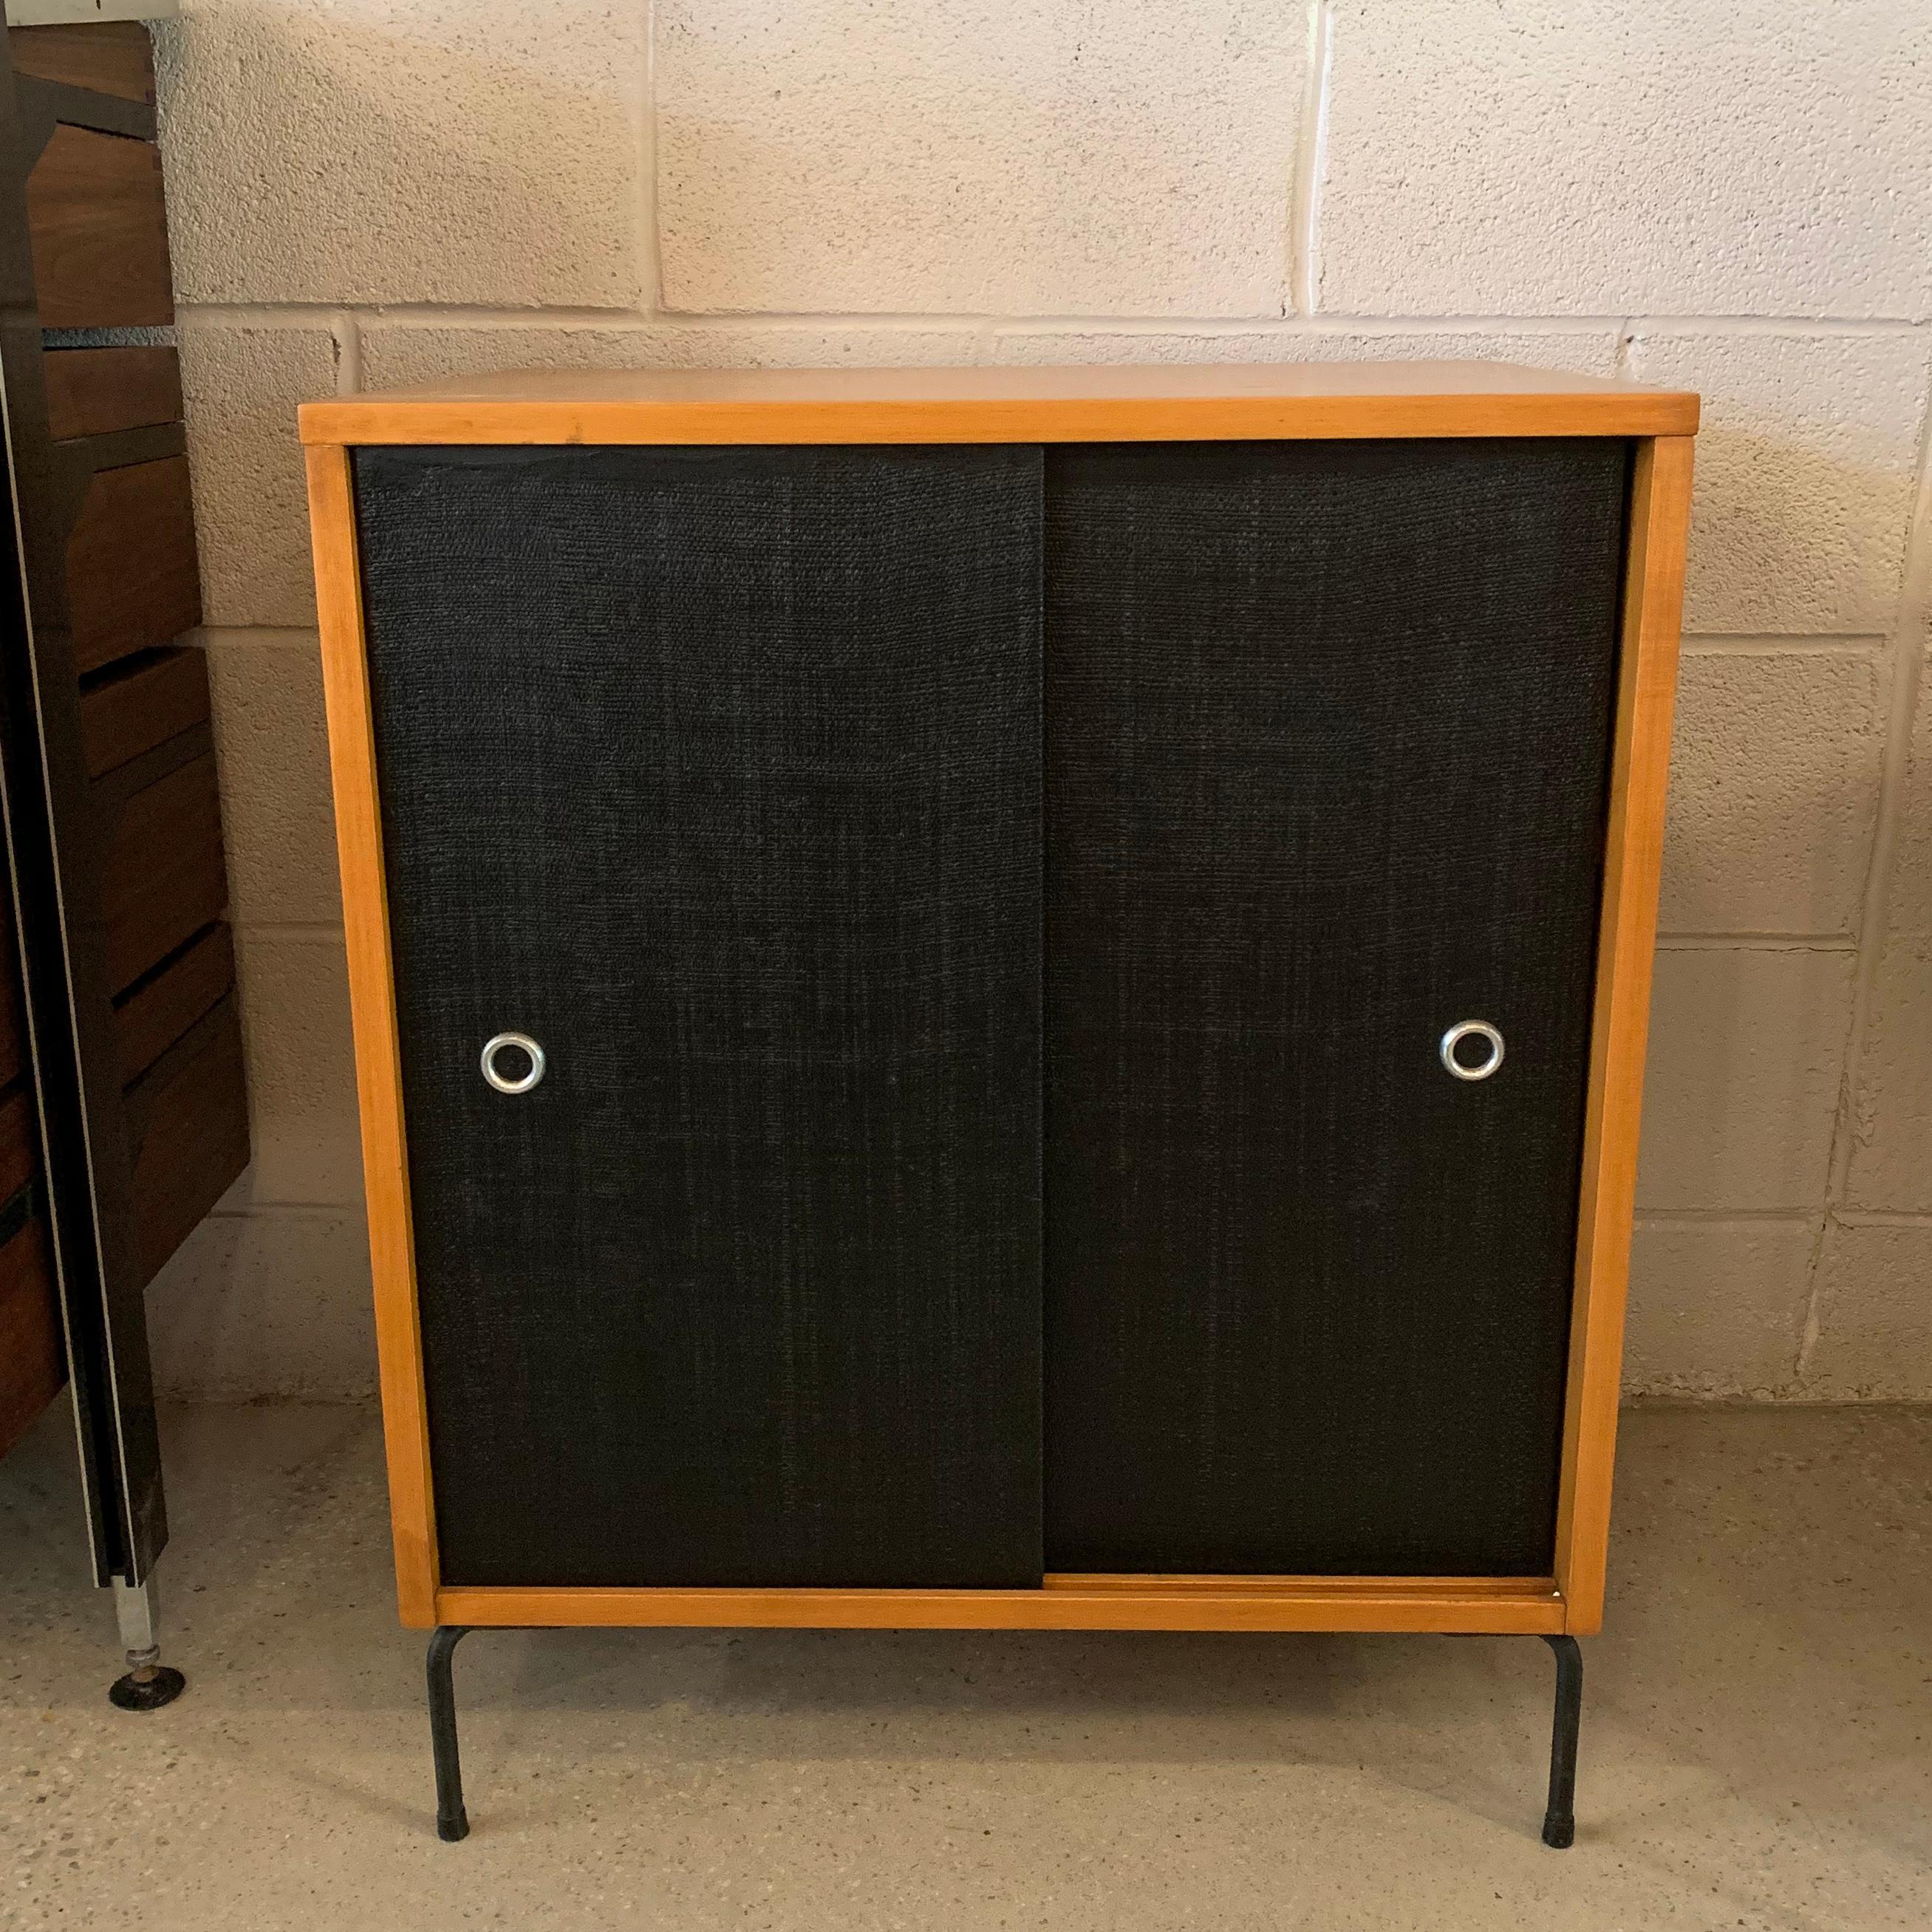 Mid-Century Modern cabinet by Paul McCobb, Planner Group, Winchendon features a solid natural maple body with contrasting black grass cloth sliding door fronts and added wrought iron legs.